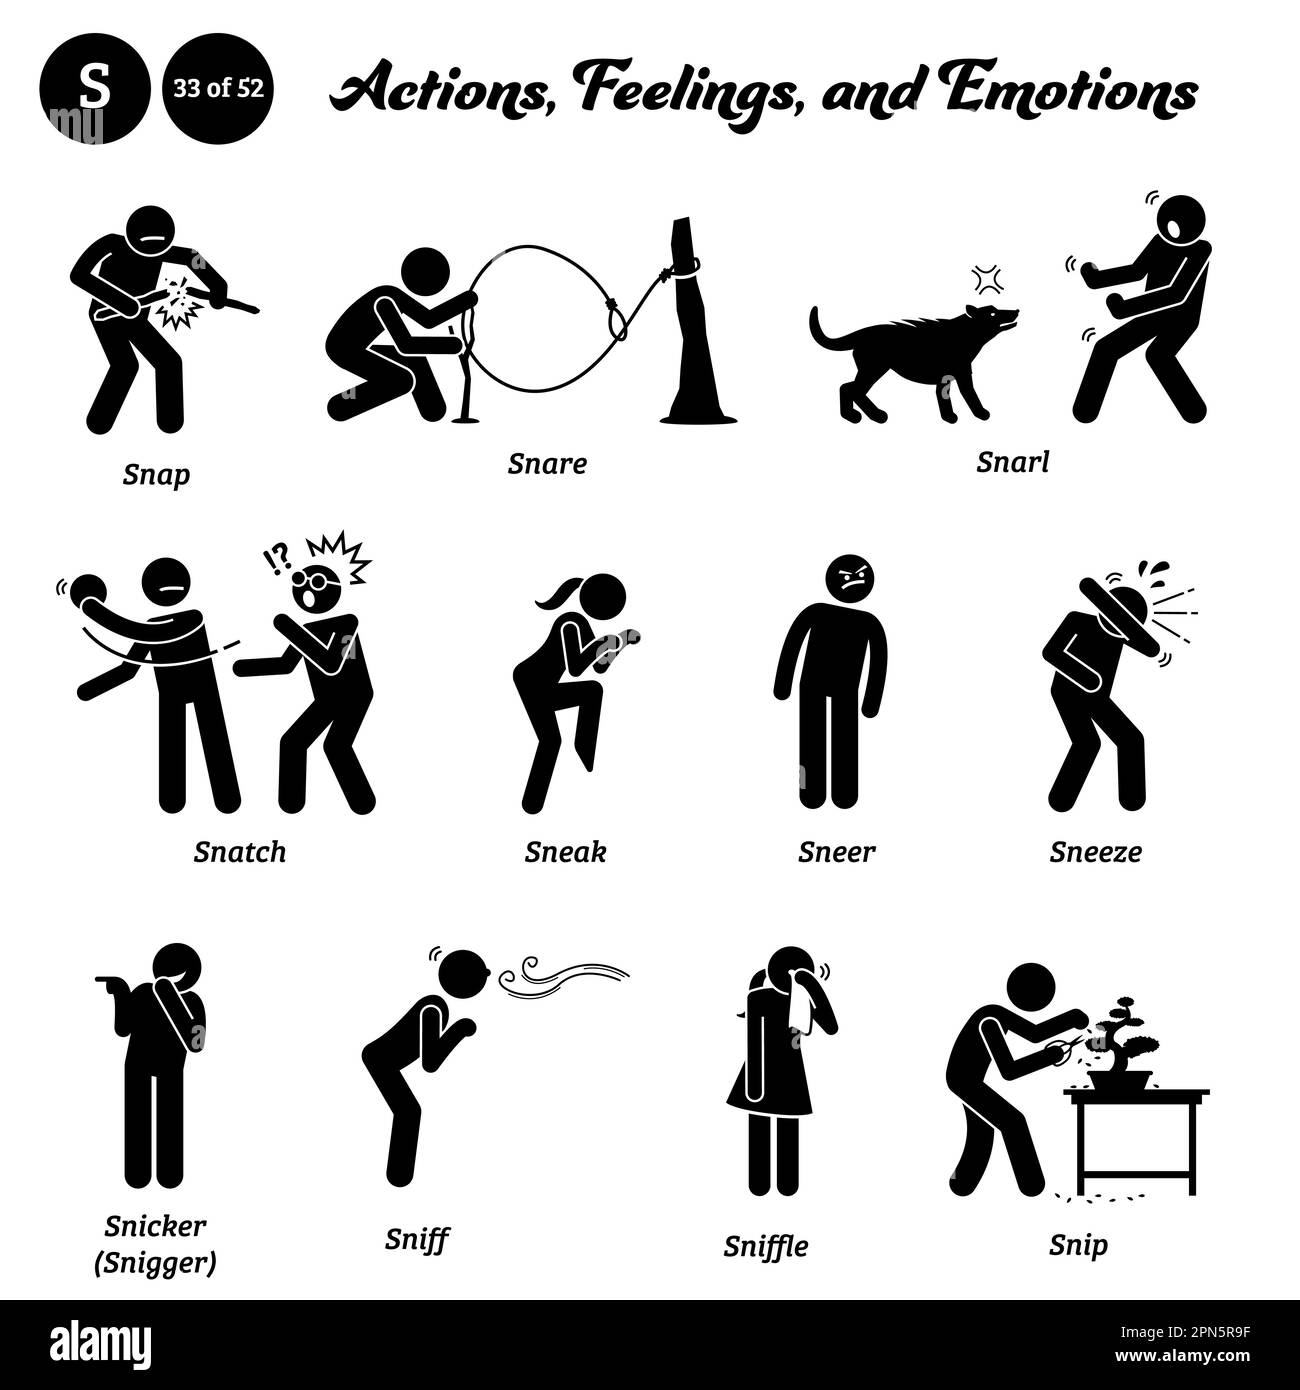 Stick figure human people man action, feelings, and emotions icons alphabet S. Snap, snare, snarl, snatch, sneak, sneer, sneeze, snicker, snigger, sni Stock Vector